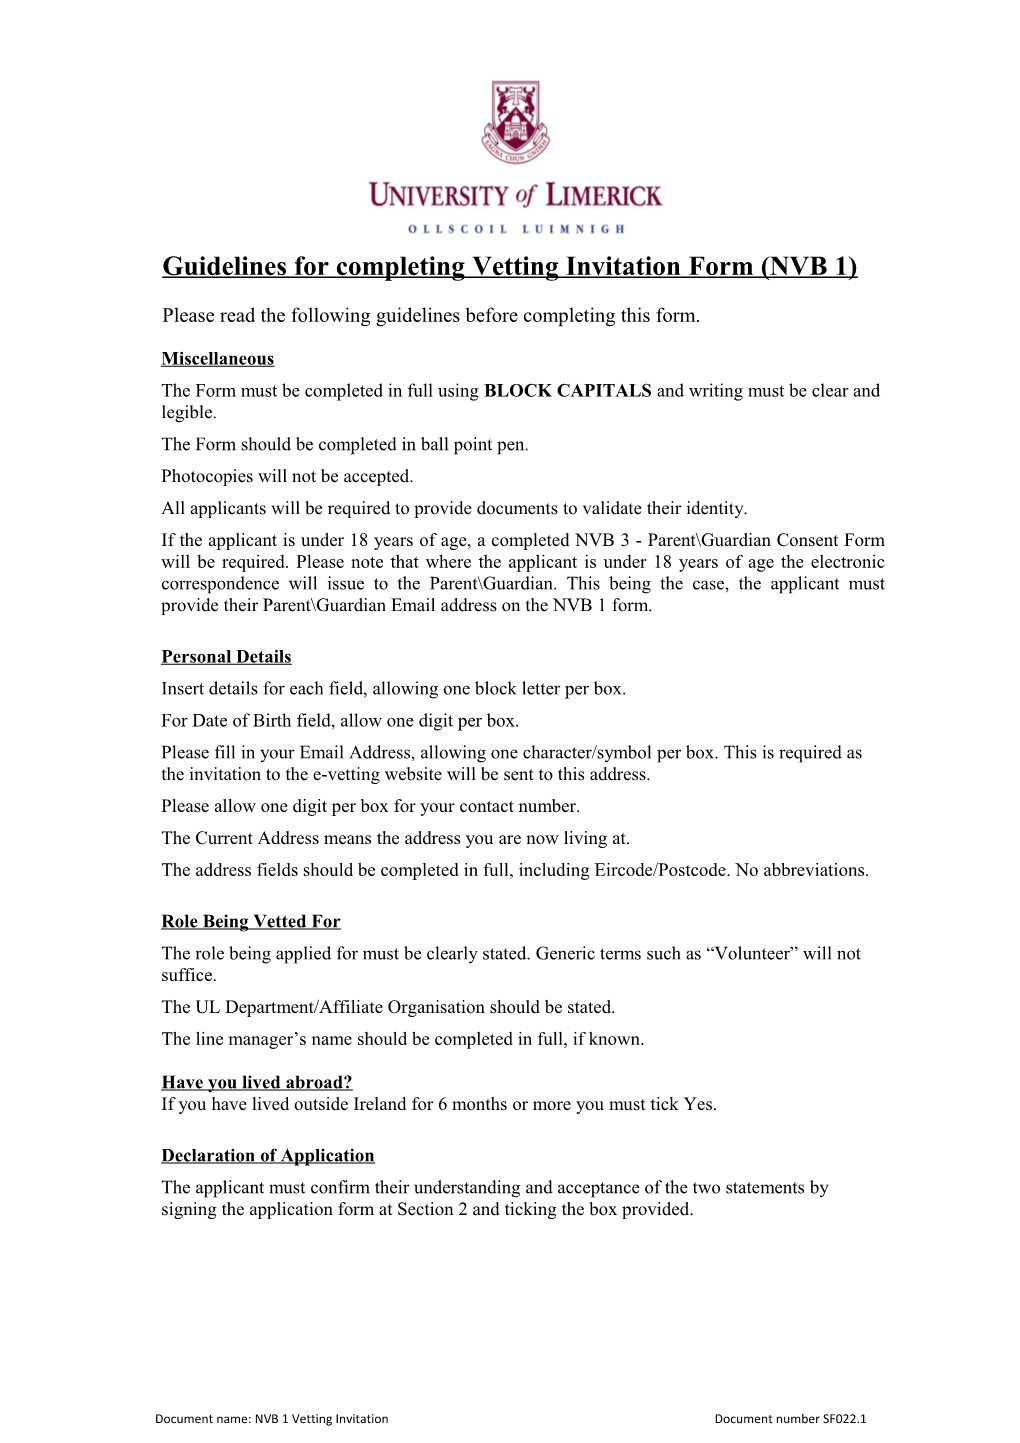 Guidelines for Completing Vetting Invitationform (NVB1)